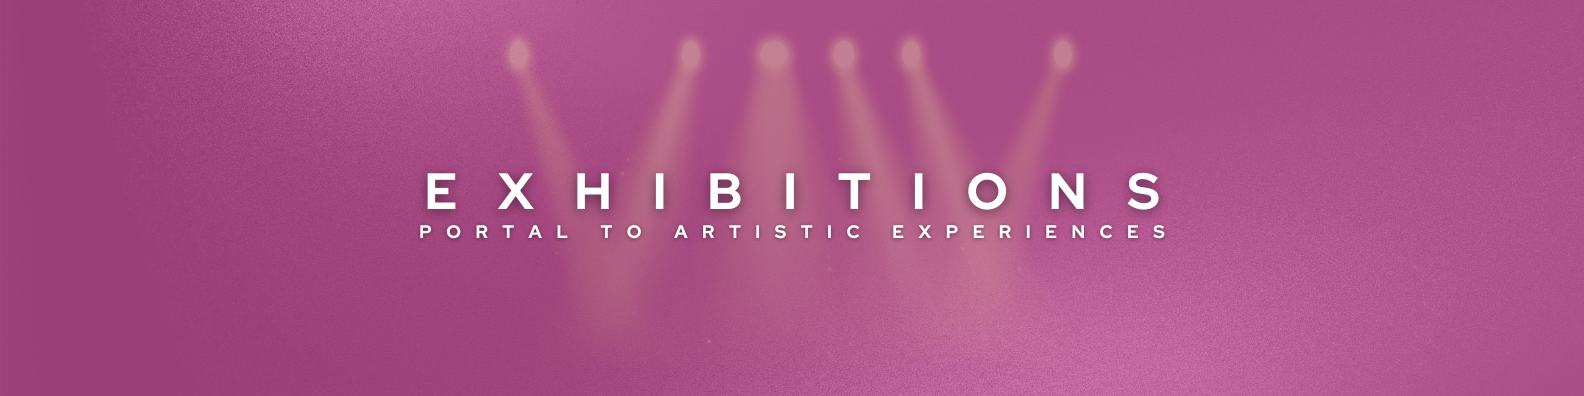 exhibitions cover photo